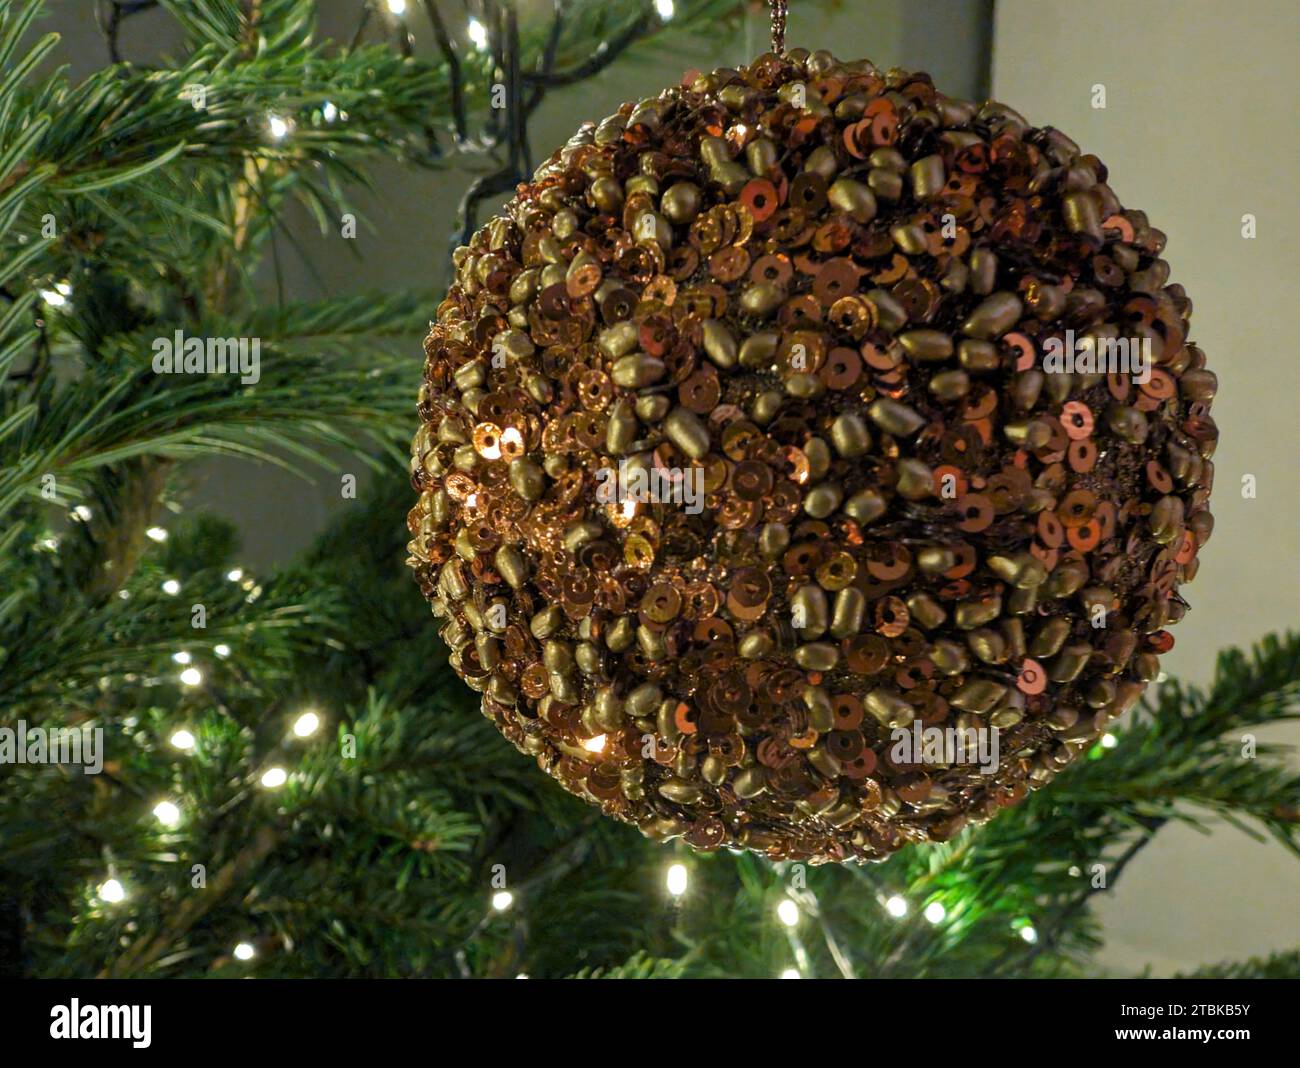 A festive decoration featuring a colorful beaded ball ornament suspended from an evergreen Christmas tree Stock Photo